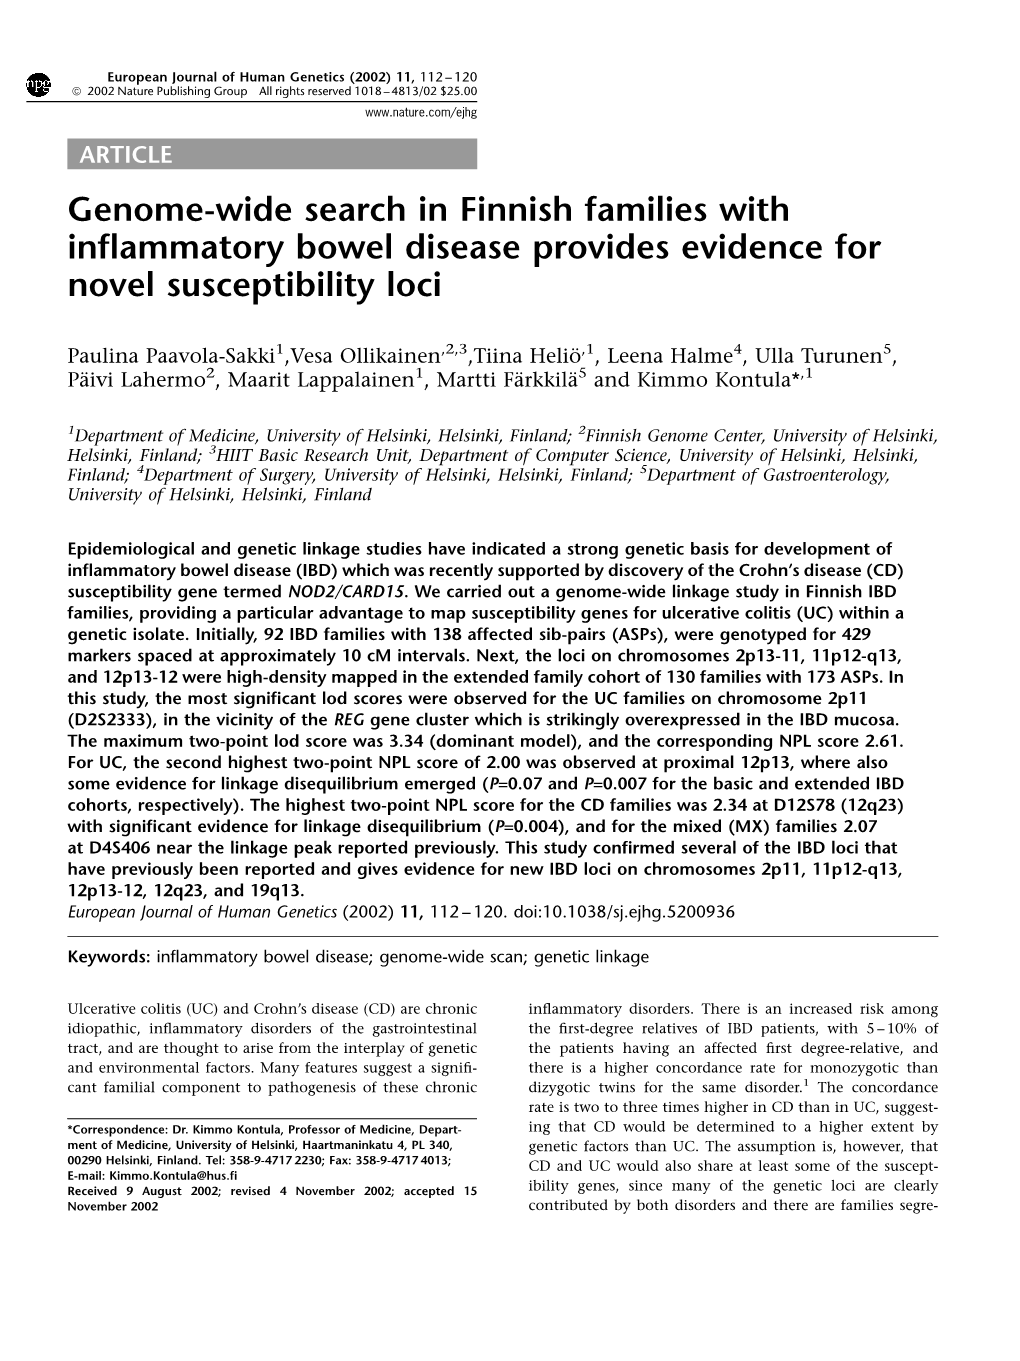 Genome-Wide Search in Finnish Families with Inflammatory Bowel Disease Provides Evidence for Novel Susceptibility Loci